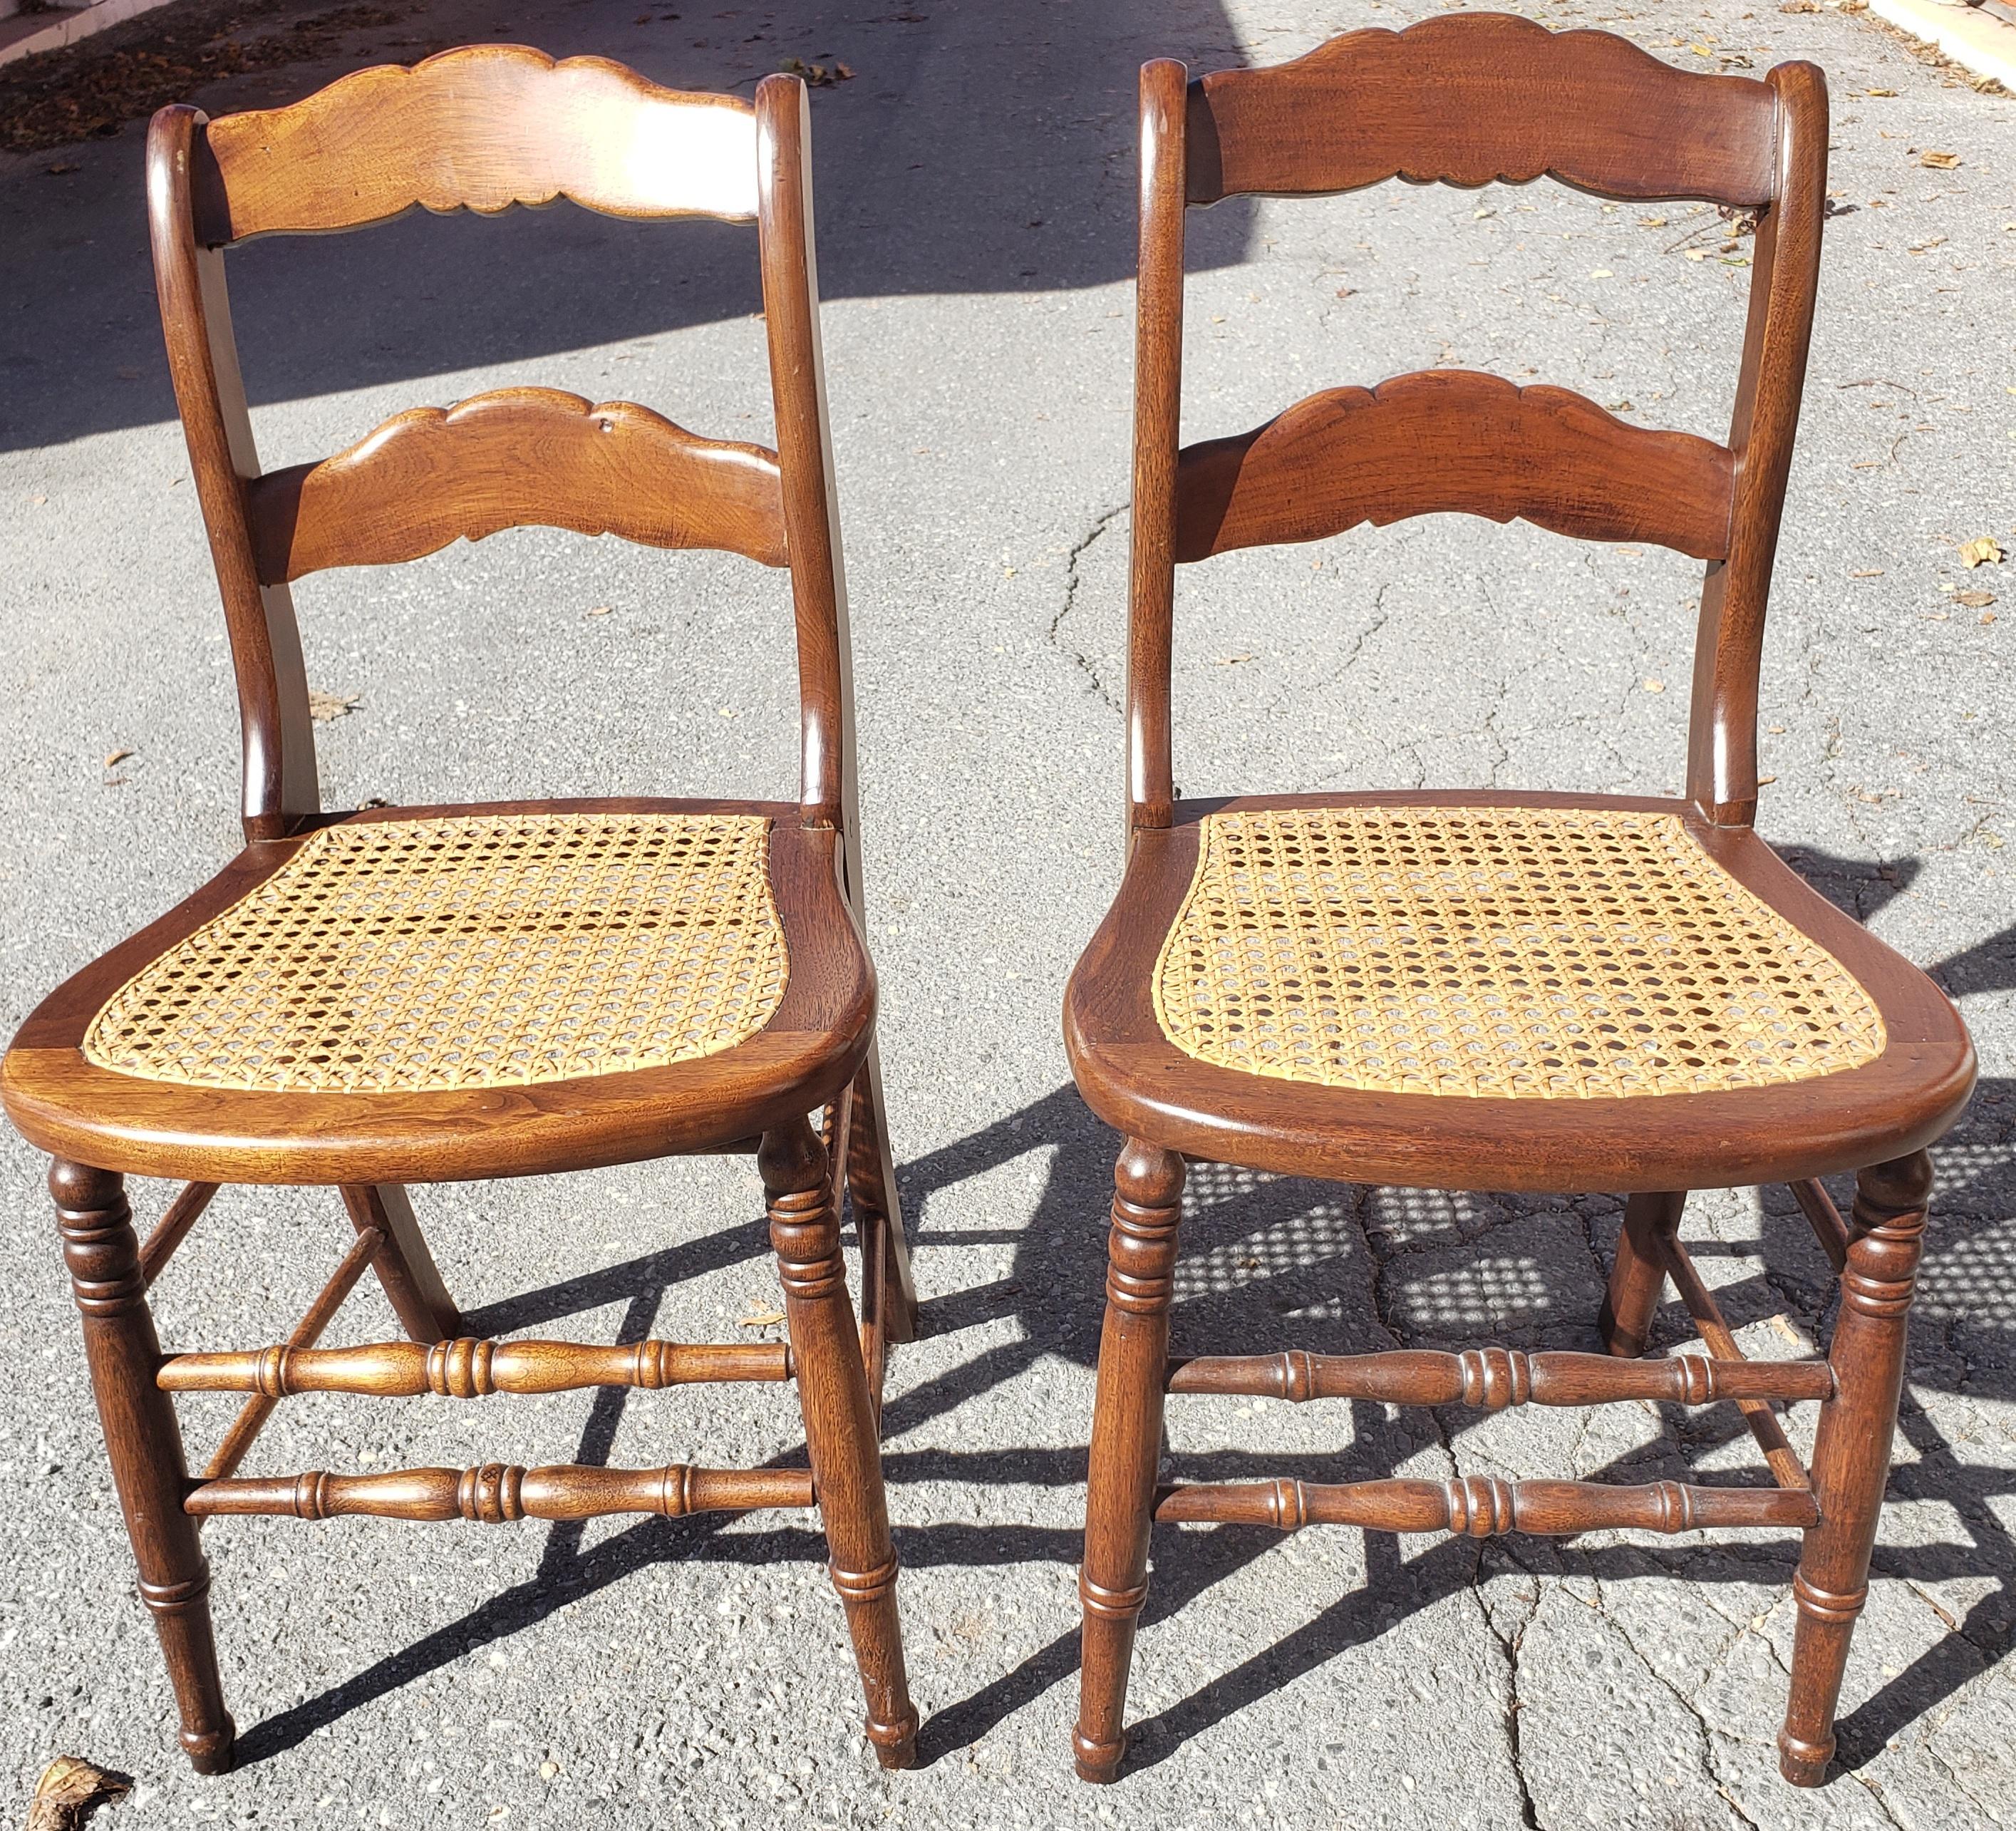 Caning Late 19th Century Americana Cane Seat and Ladder Back Chairs, a Pair